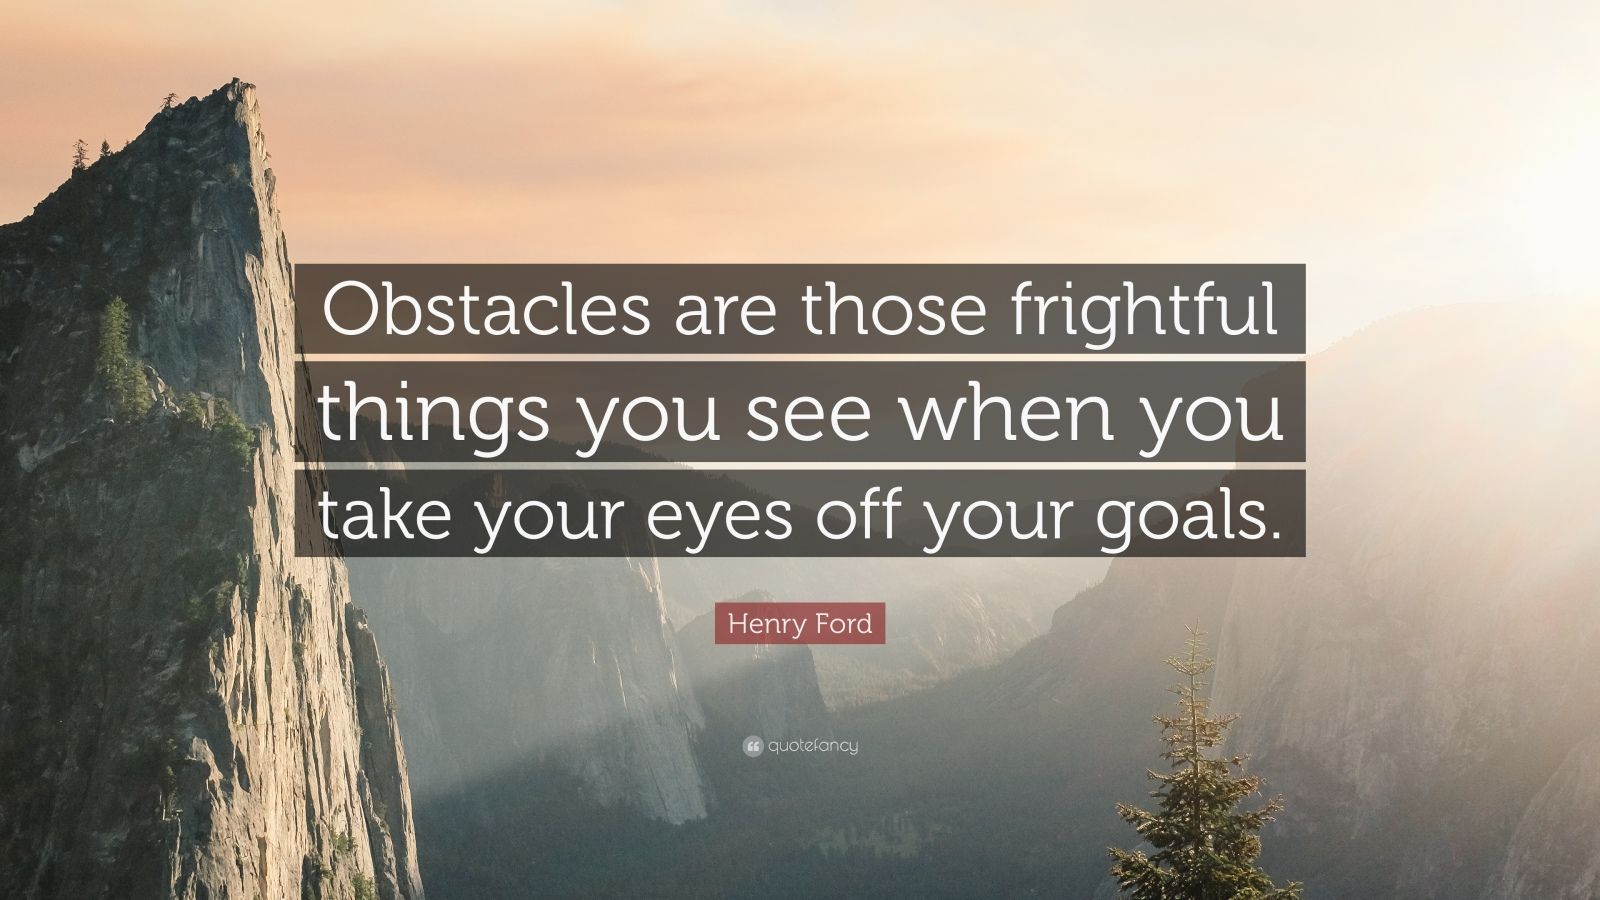 Henry ford quote on obstacles #4